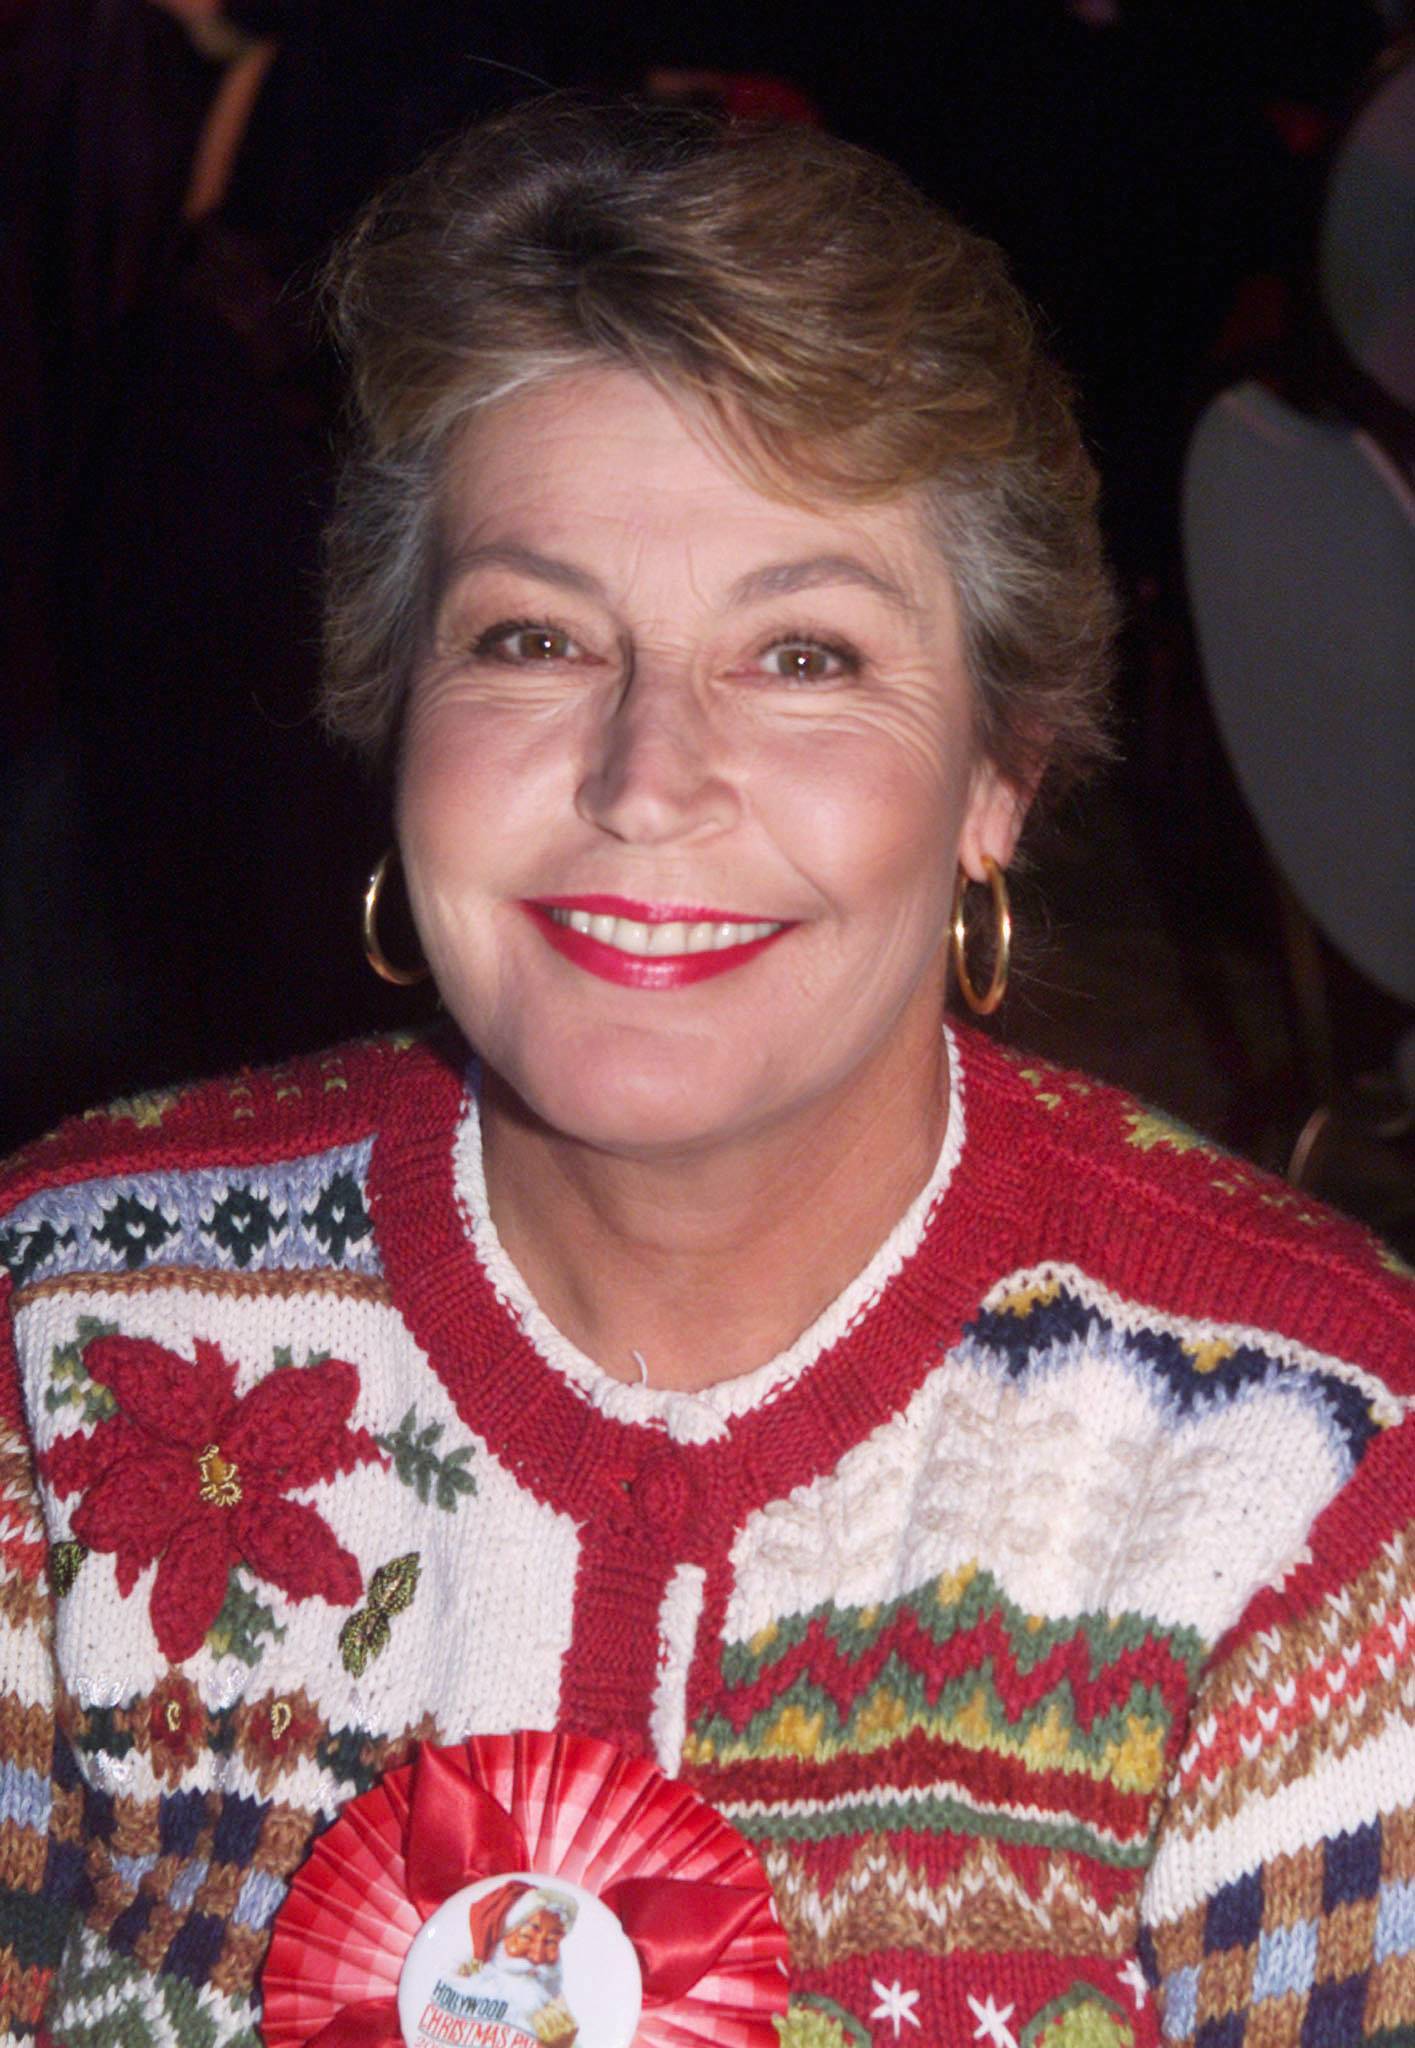 FILE PHOTO: Singer Helen Reddy poses in the VIP reception room at the 69th annual Hollywood Christmas Parade November 26, 2000 in Hollywood